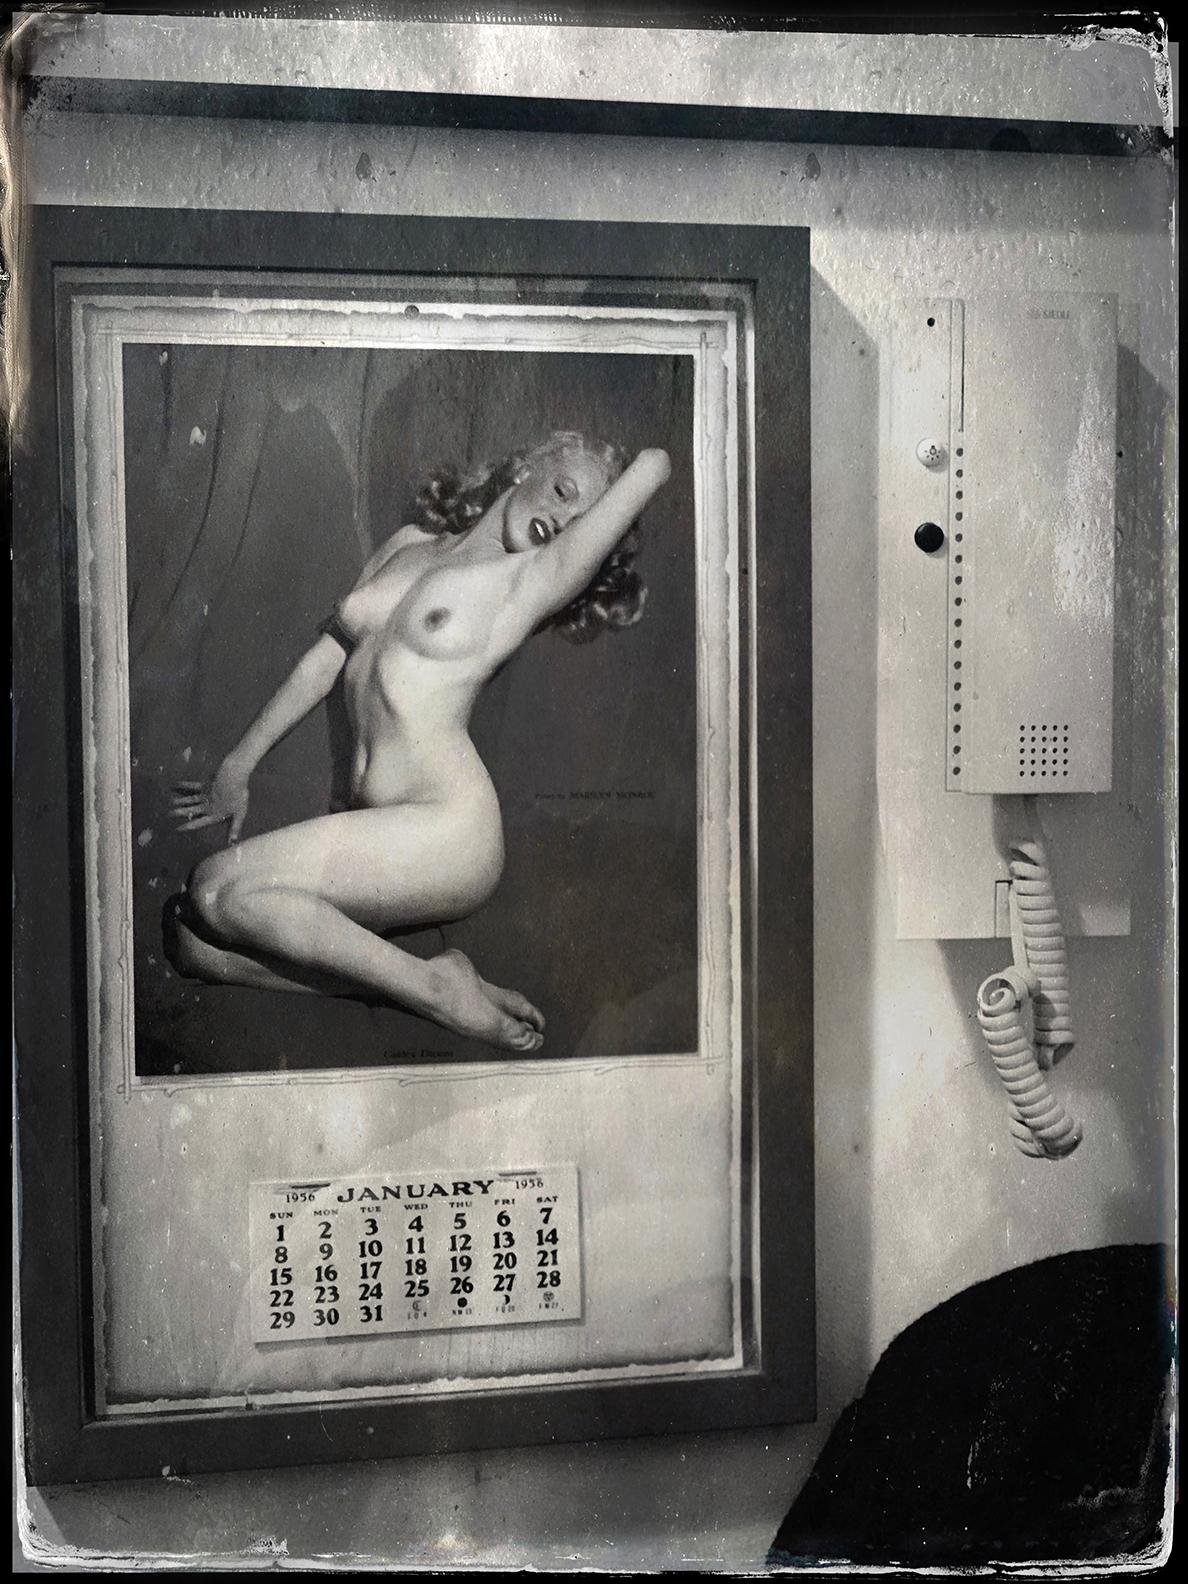 Artist: Sally Davies (1956)
Title: Marilyn M (New York City)
Year: 2022
Medium: Inkjet print on archival paper
Edition: 12, plus proofs
Size: 24 x 36 inches
Condition: Excellent
Inscription: Signed, dated, titled by the artist
Notes: This photograph